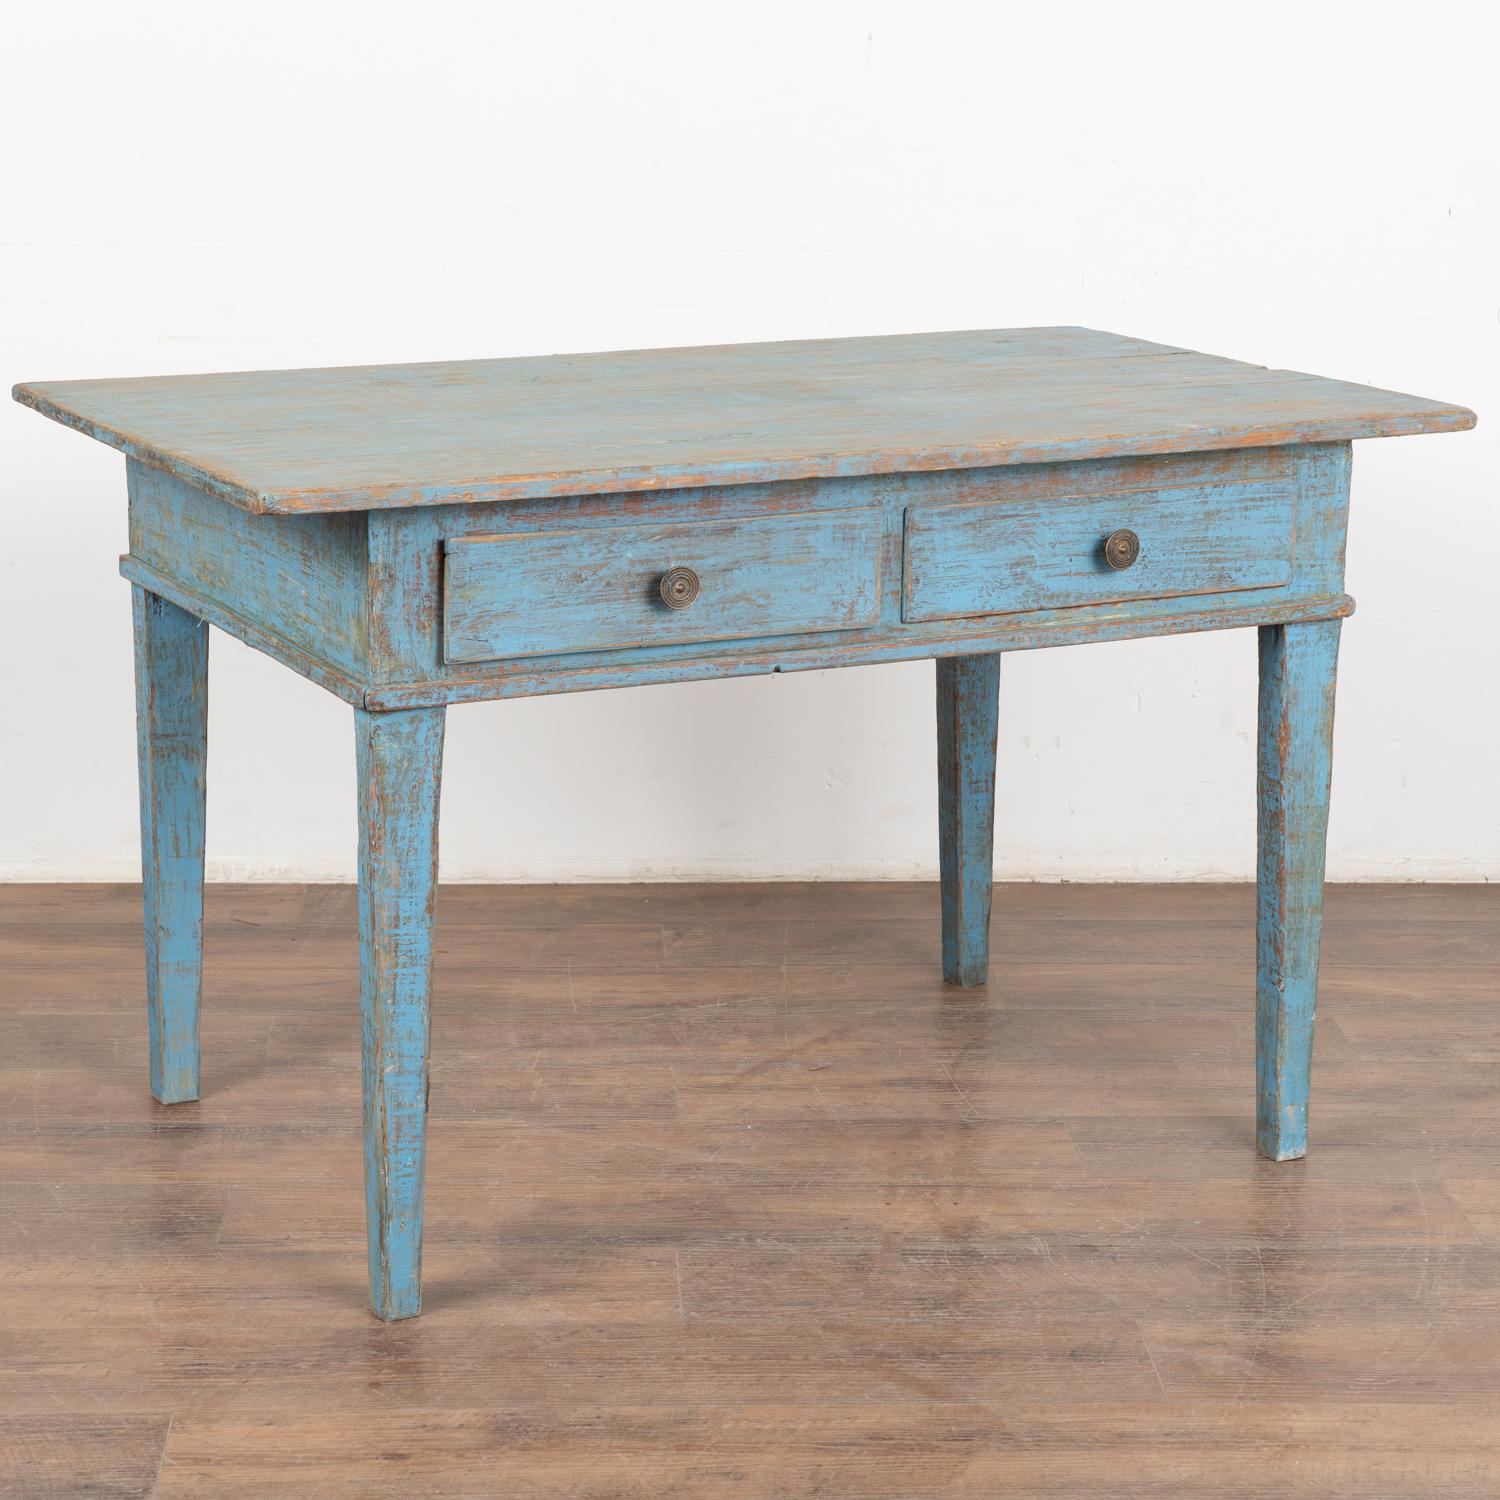 The cheerful blue painted finish has a distressed patina revealing years of use in this small farm table from Sweden.
Notice the two usable drawers with brass pulls that add function and traditional tapered legs.
Whether this is used as a kitchen